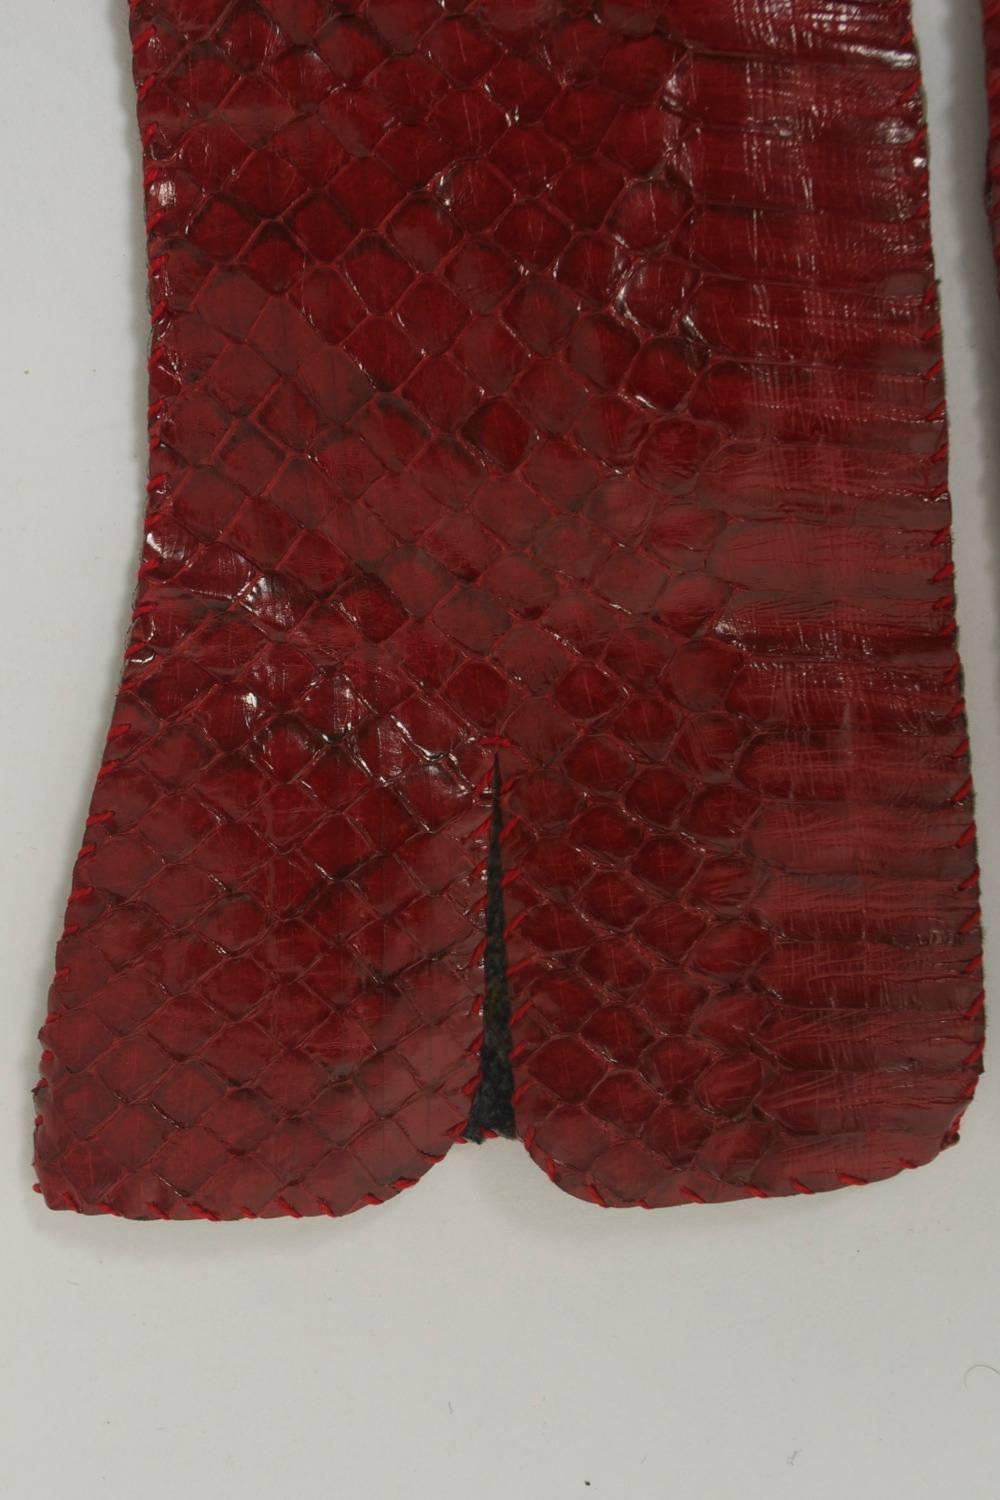 Red Snakeskin Gloves In Excellent Condition For Sale In Alford, MA